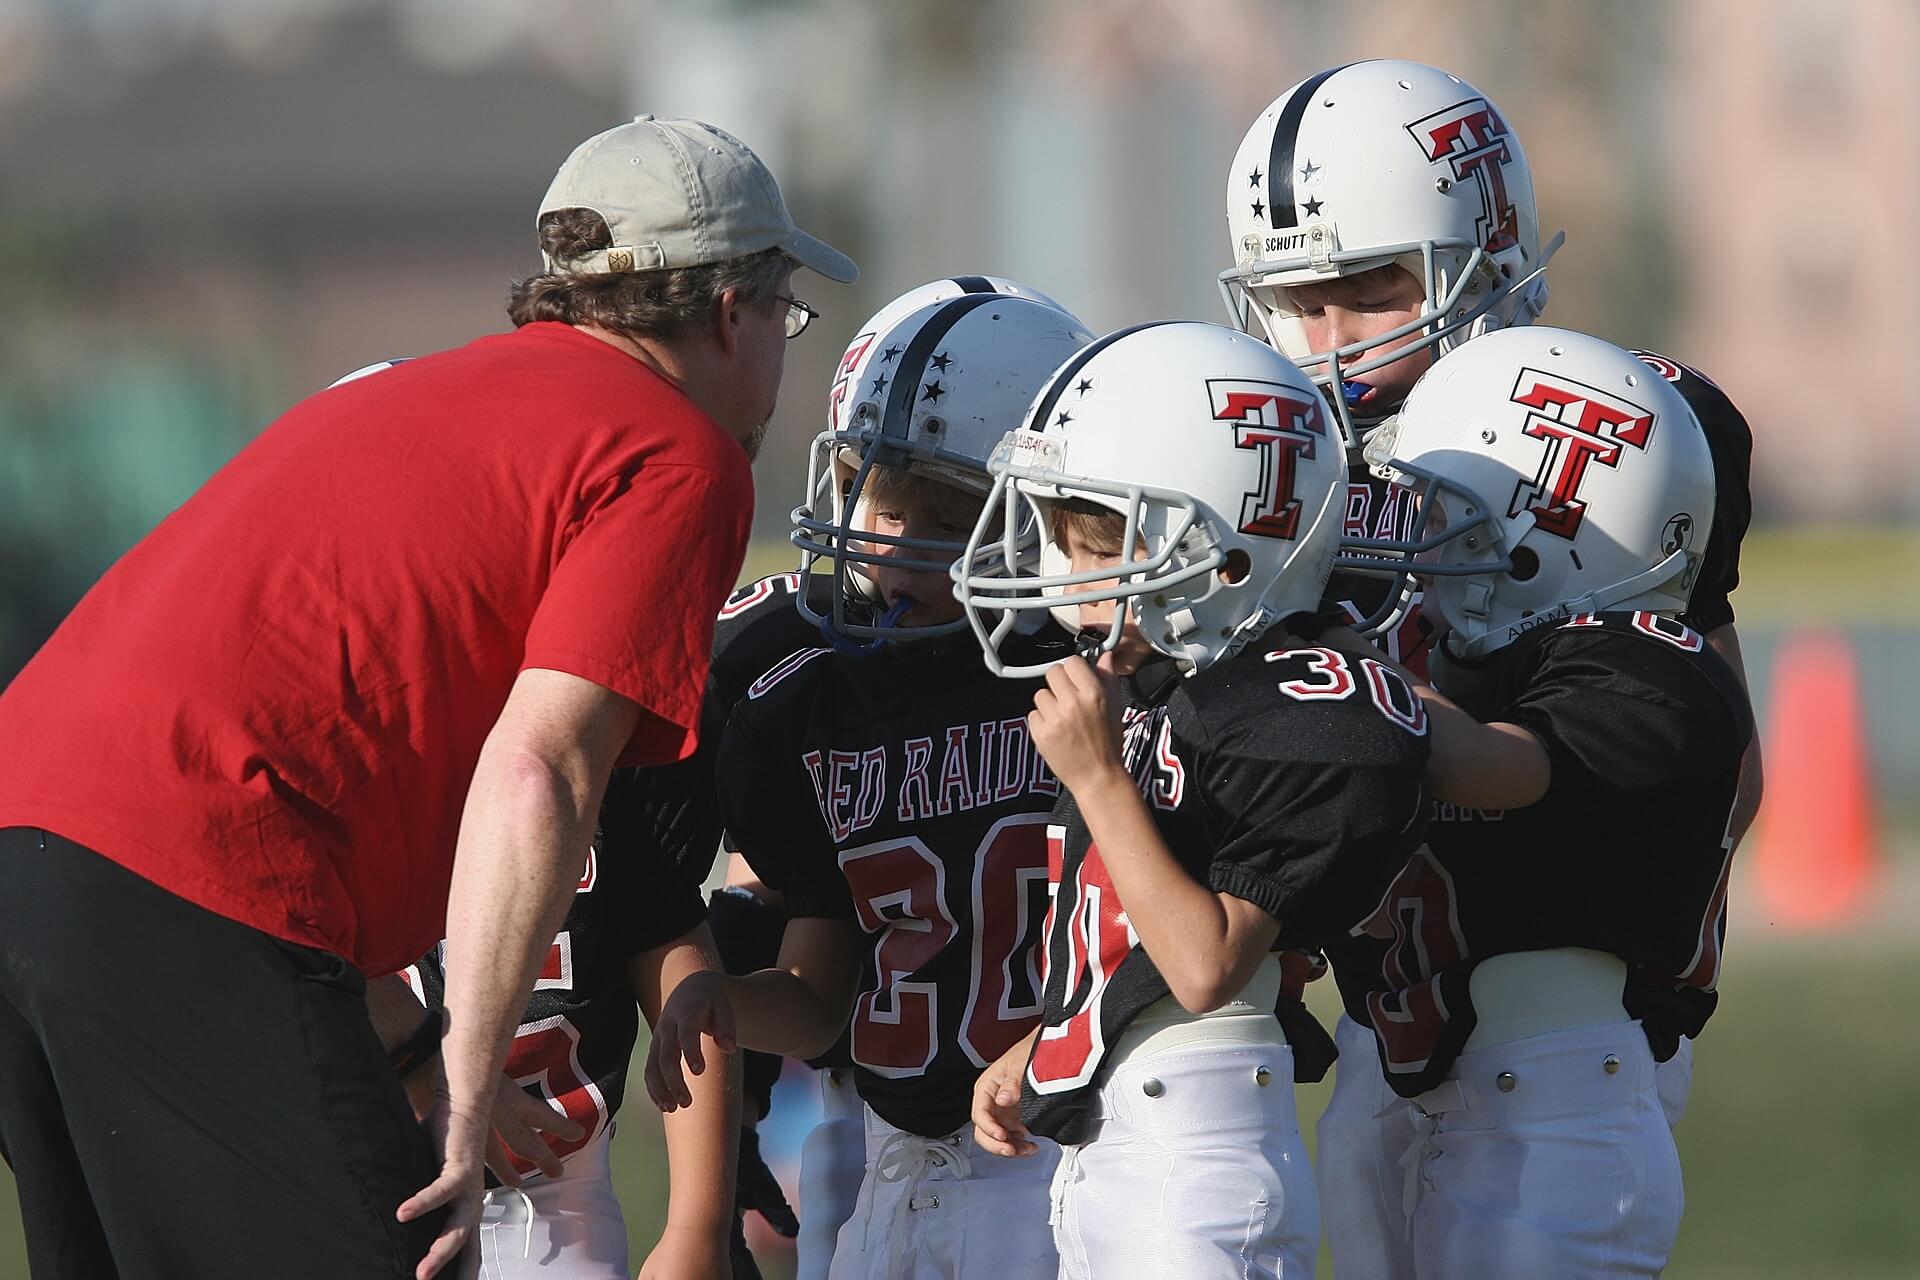 In Defense of the So-Called Uncoachable Kids